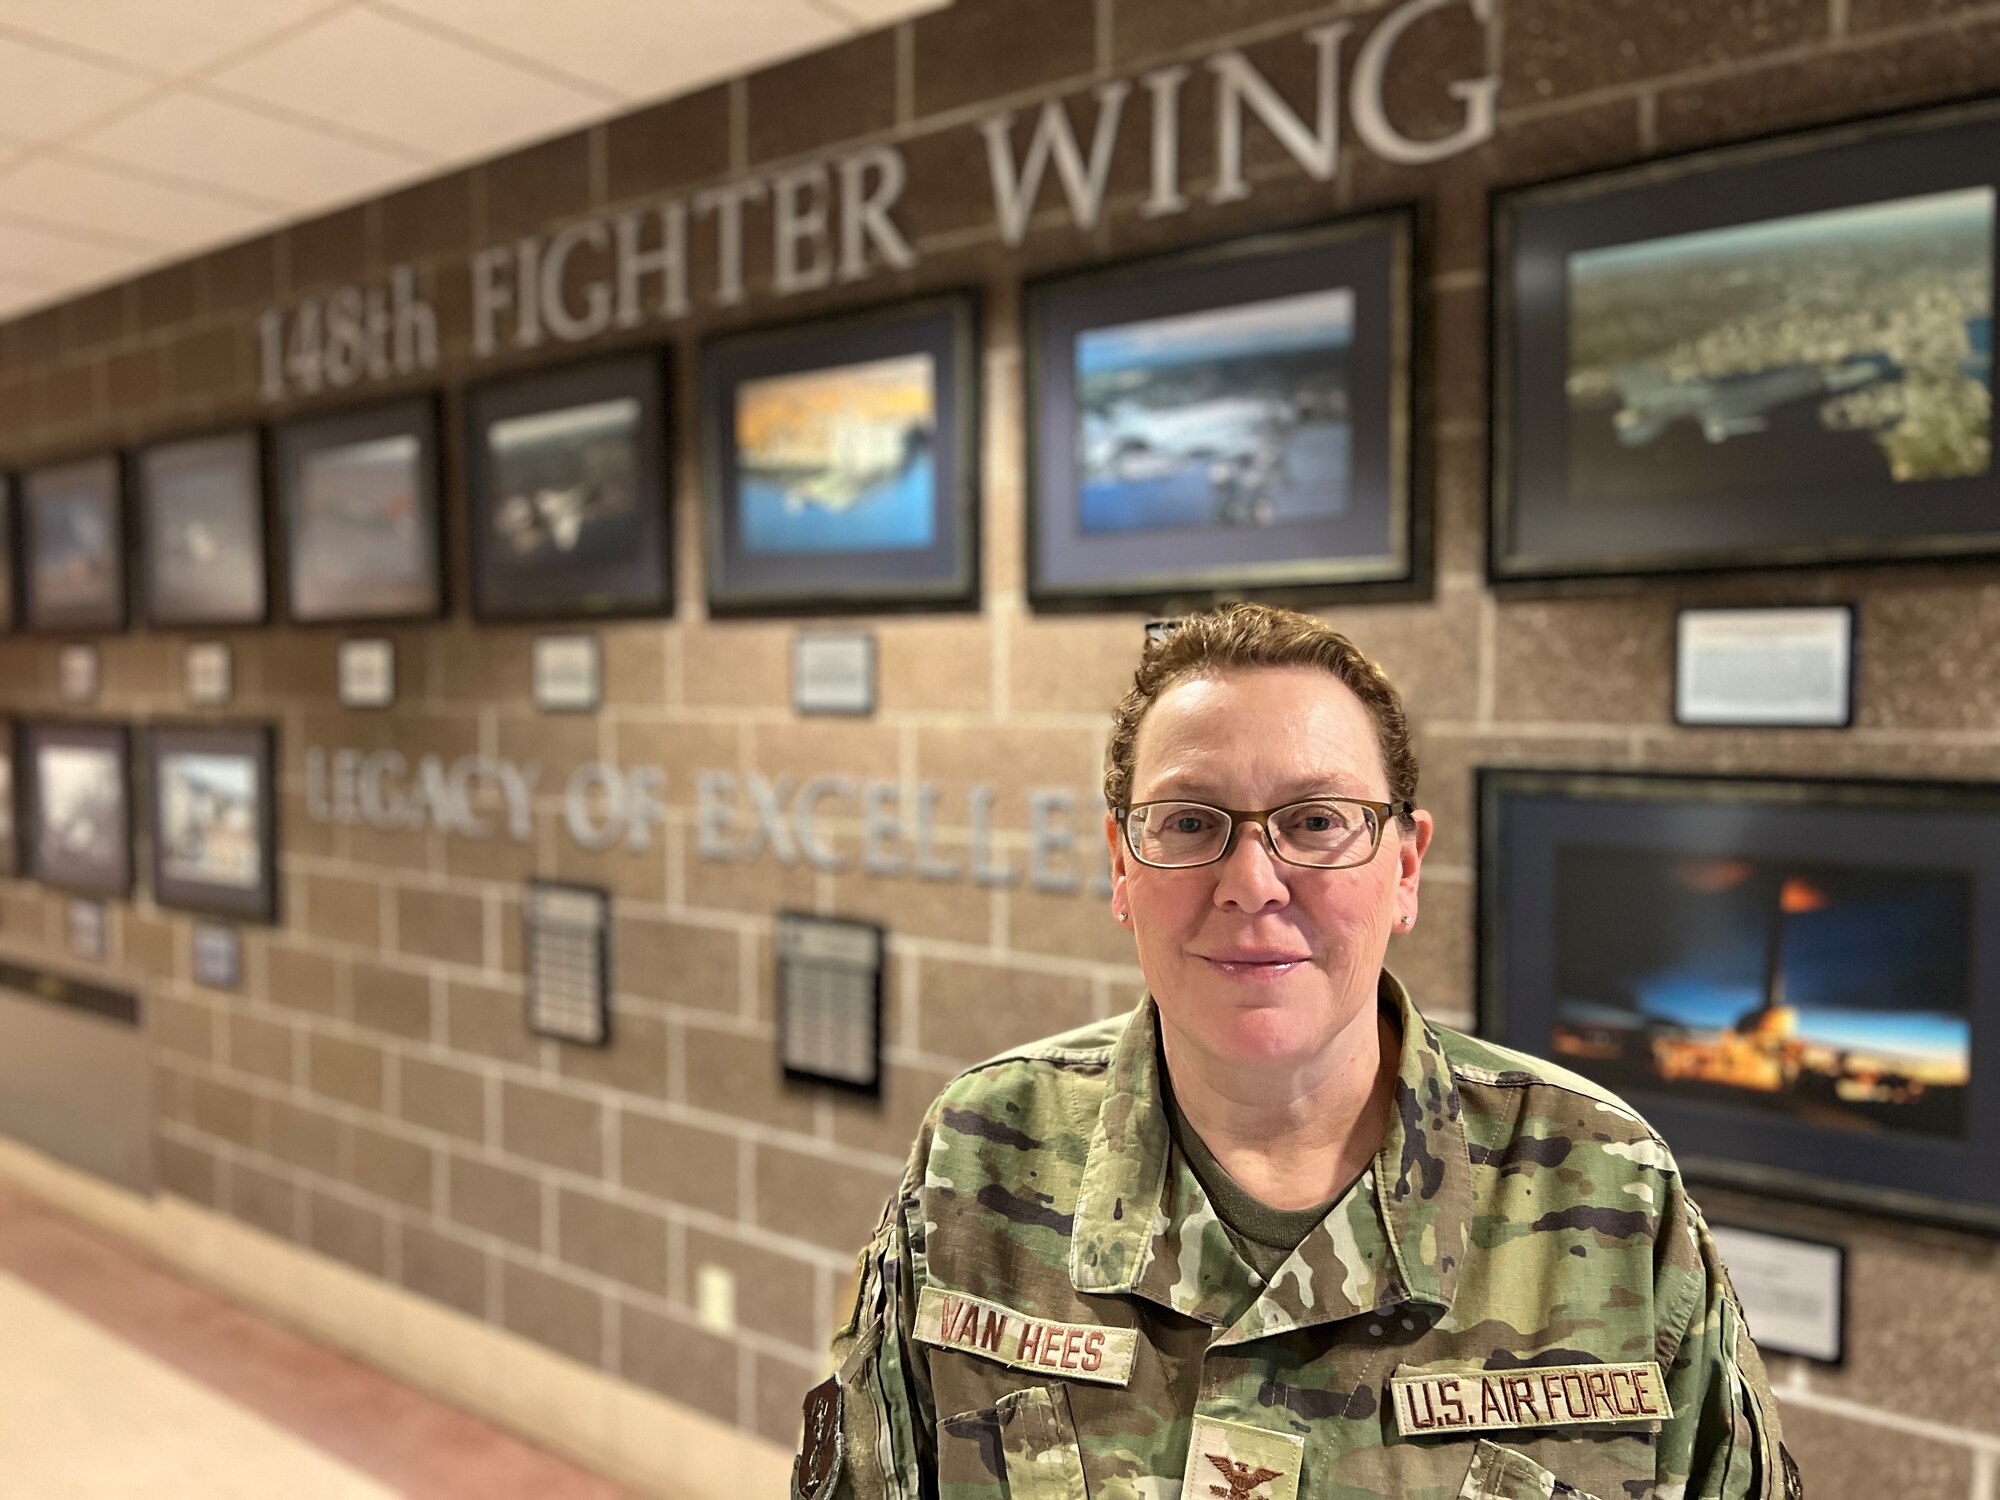 148th Fighter Wing Vice Commander, Col. Babette S. Van Hees poses for a photo at the 148th Fighter Wing, Minnesota Air National Guard, on March 16, 2023. Van Hees has served as both enlisted and as an officer with the U.S. Air Force, Air Force Reserve and Air National Guard in diverse AFSCs.